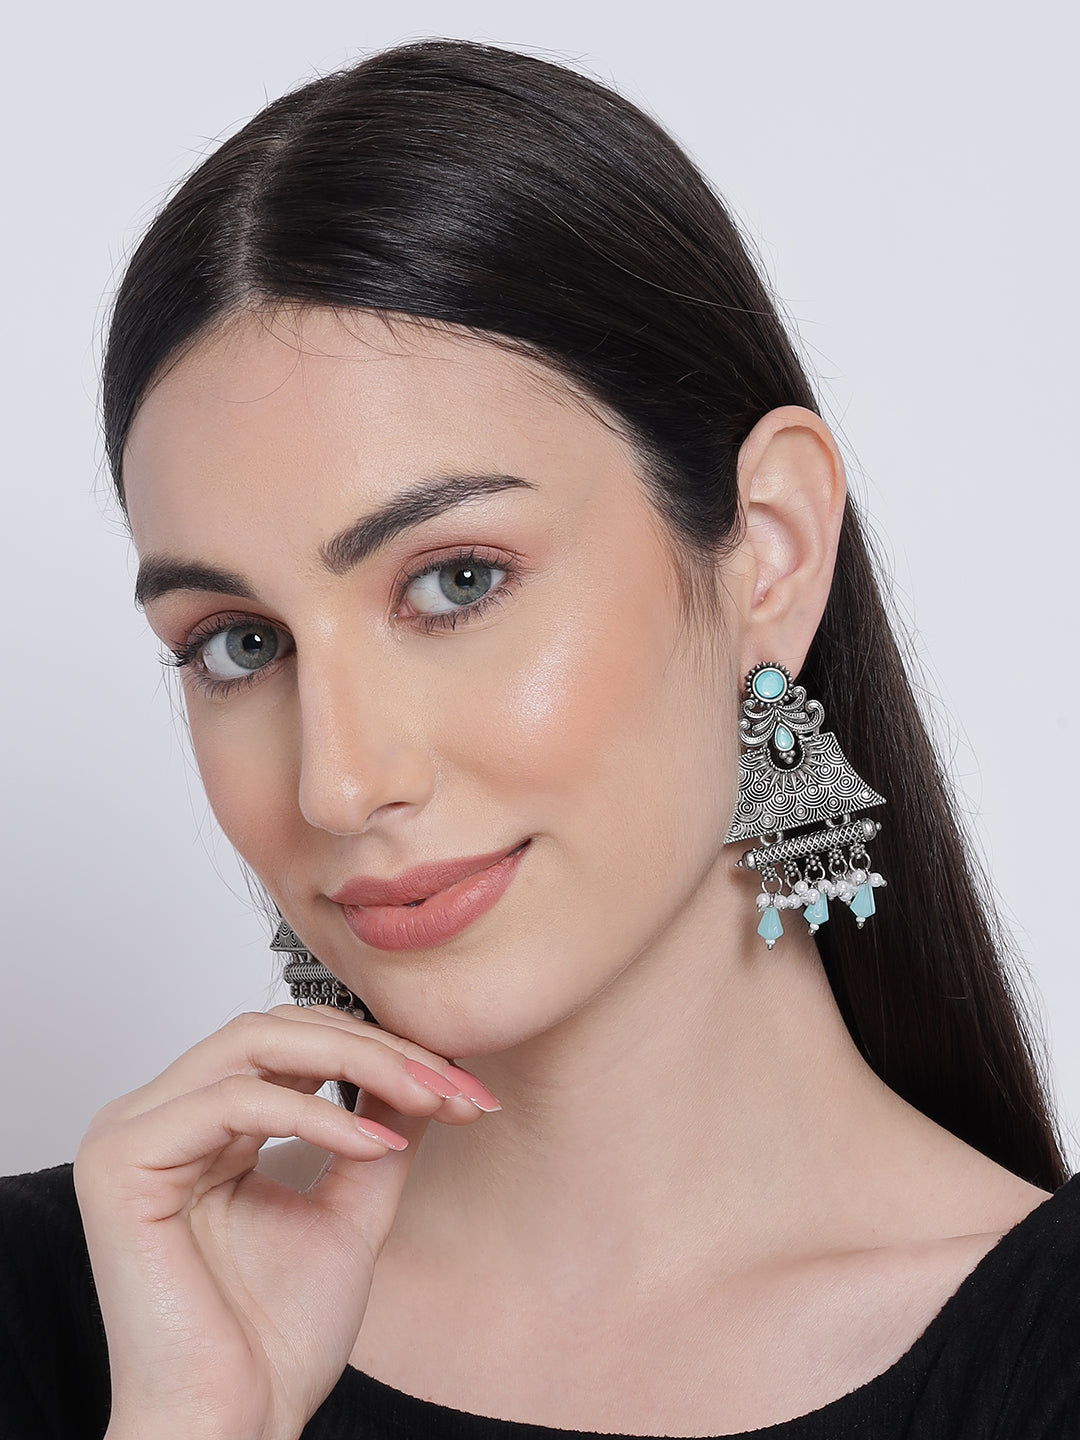 Silver-Toned & Turquoise Blue Dome Shaped Drop Earrings